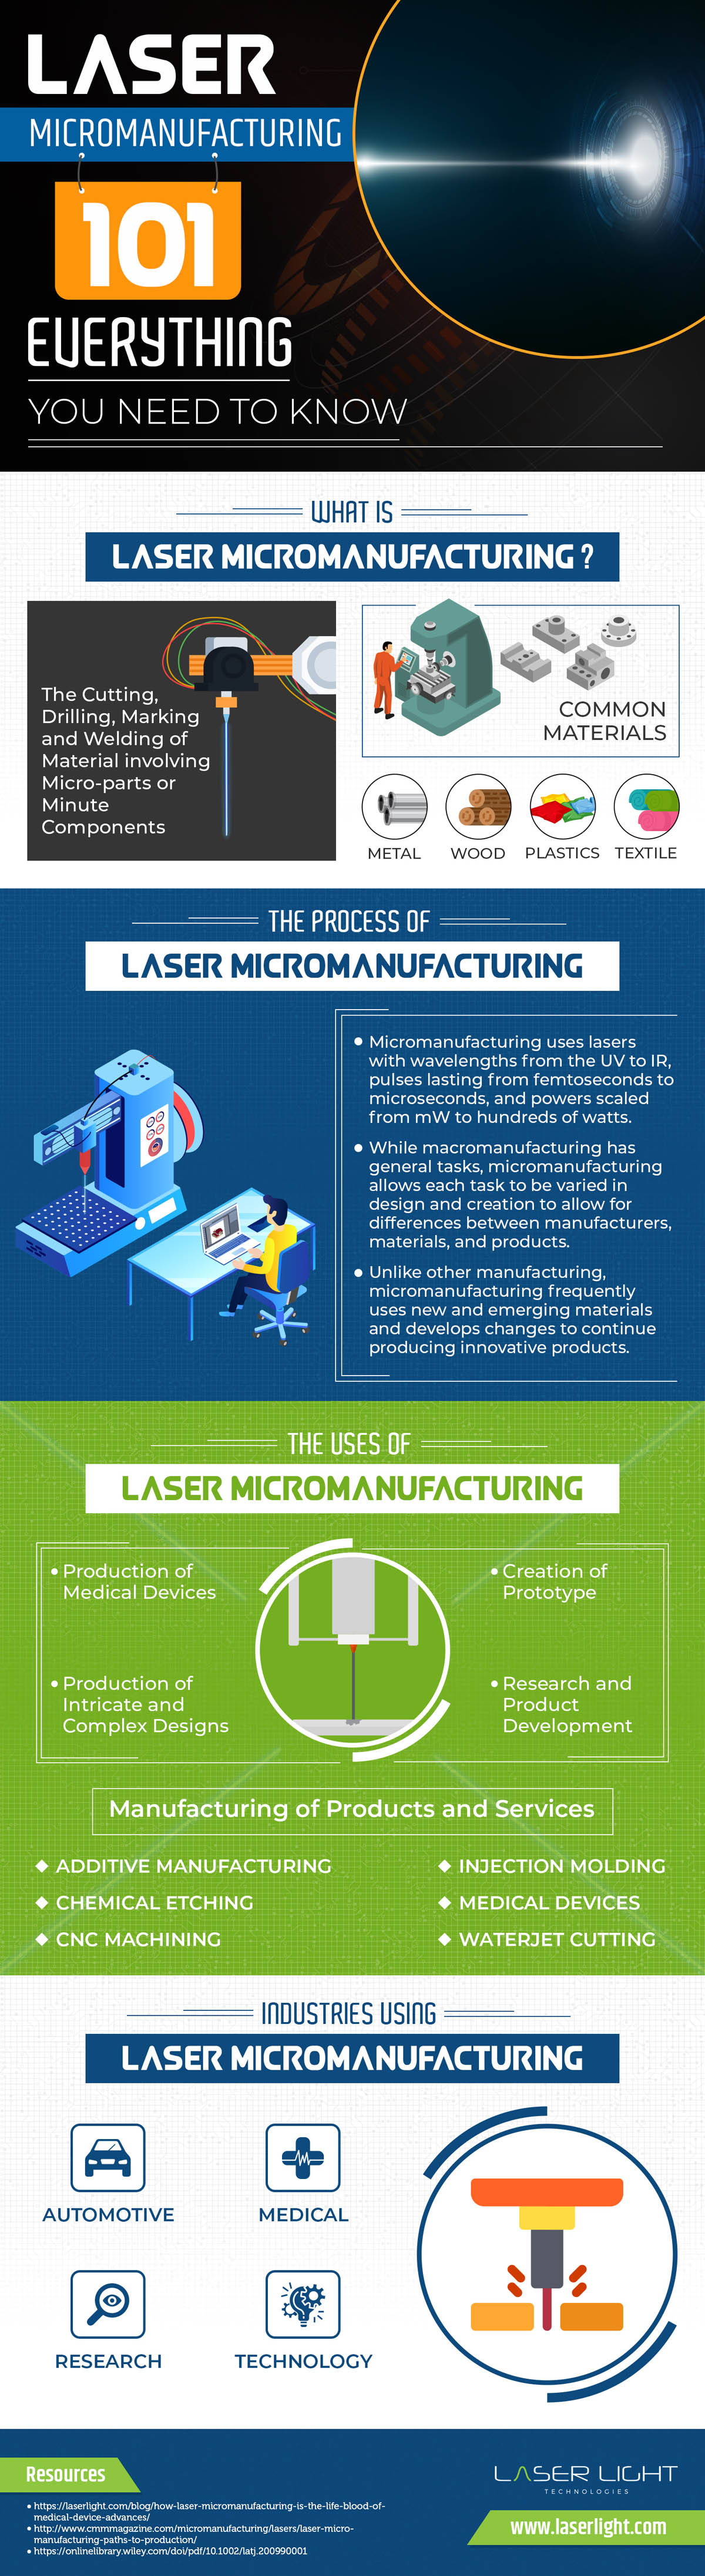 Laser Micromanufacturing 101: Everything You Need to Know